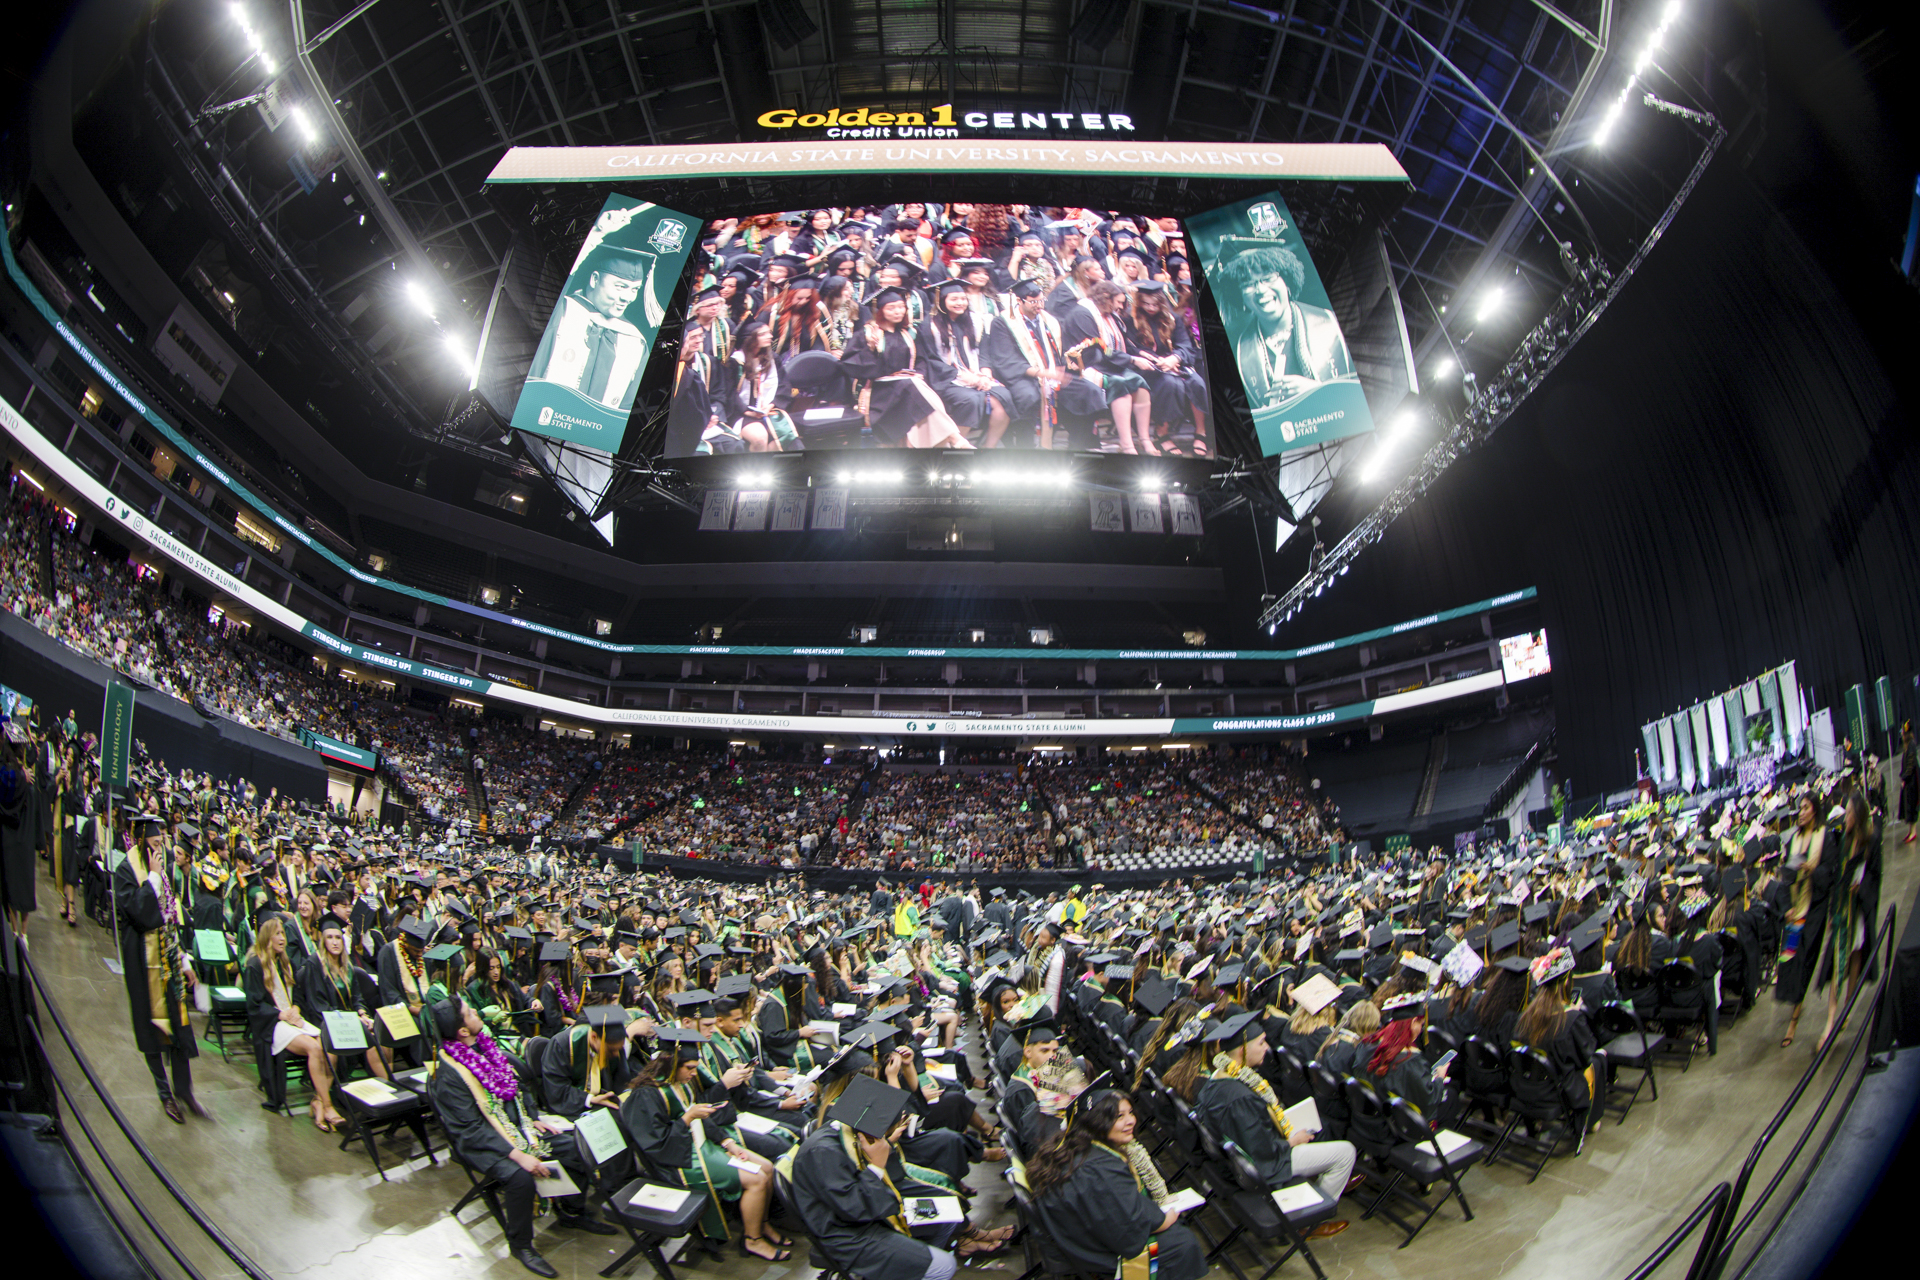 Graduates gathered on the floor of the Golden 1 Center, with the video display above and the audience in the background.